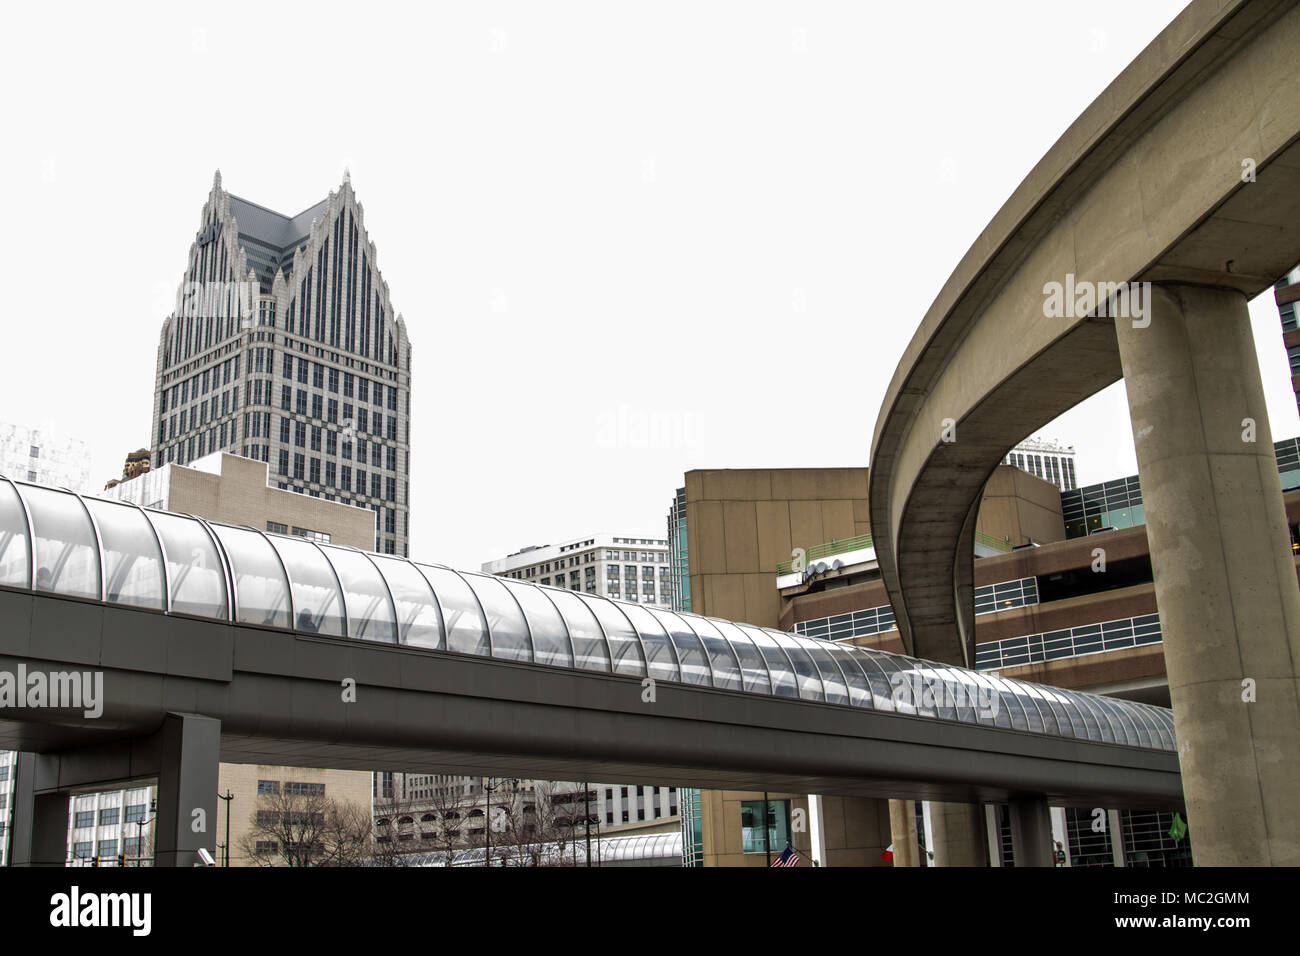 Detroit, Michigan, USA: People mover tram and pedestrian overpass set against the skyscrapers of downtown Detroit Michigan. Stock Photo